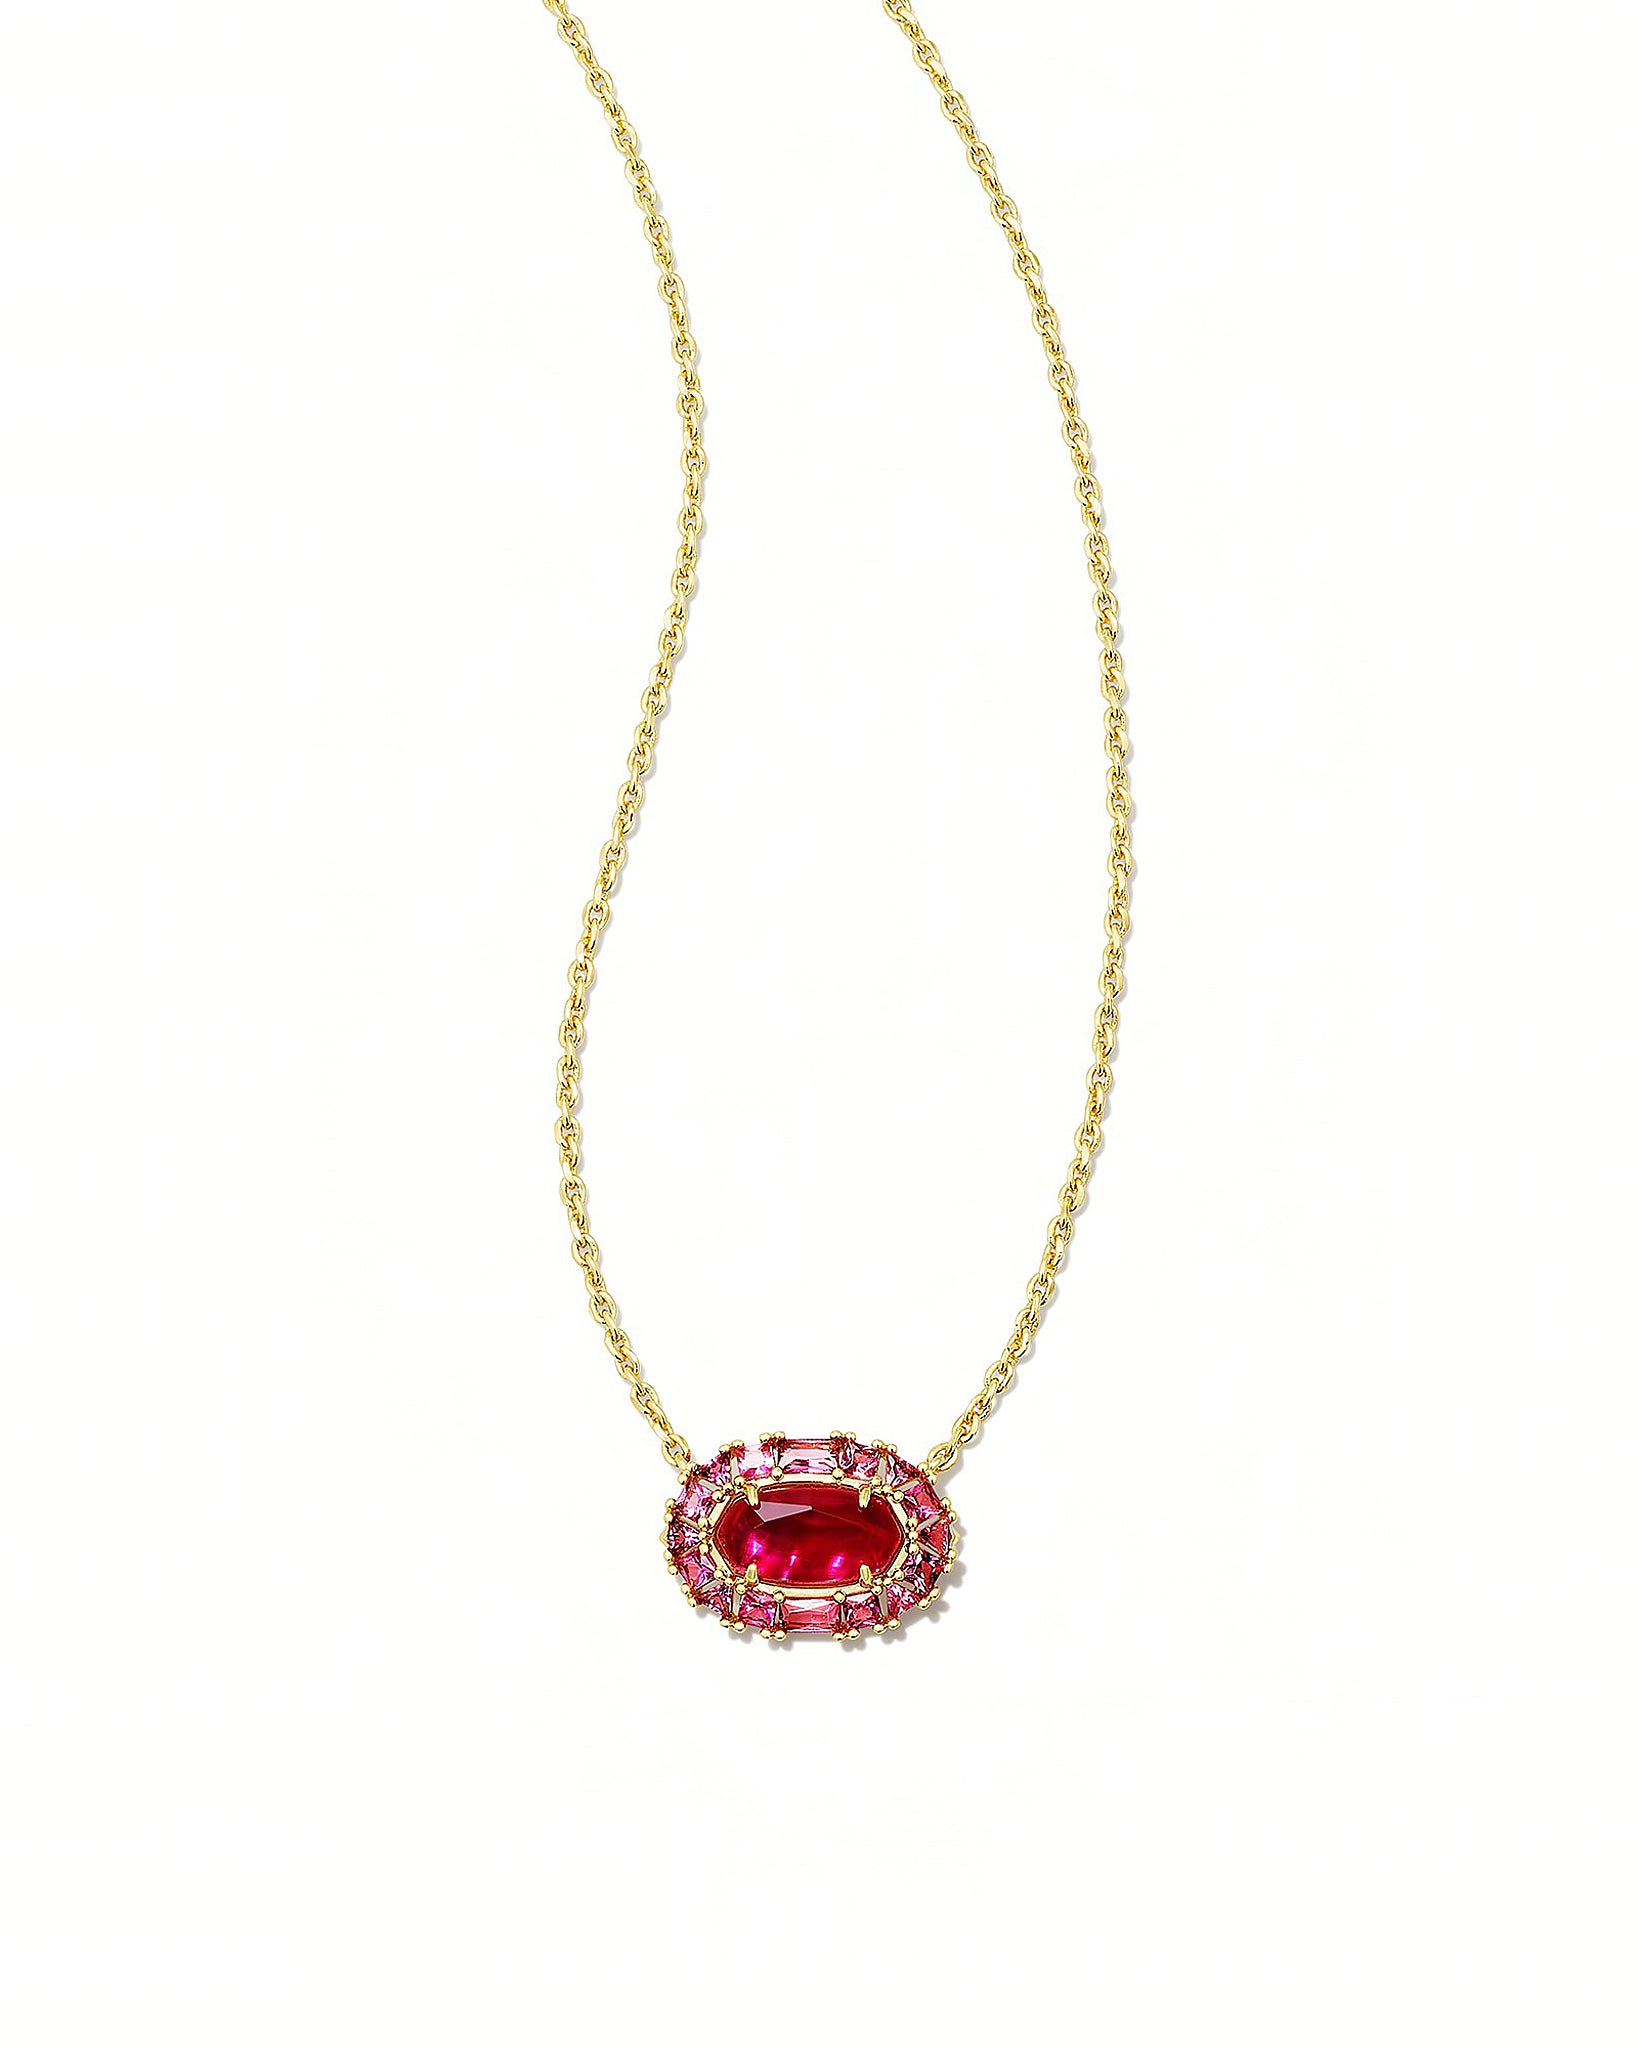 Kendra Scott Elisa Crystal Frame Pendant Necklace in Raspberry Illusion and Gold